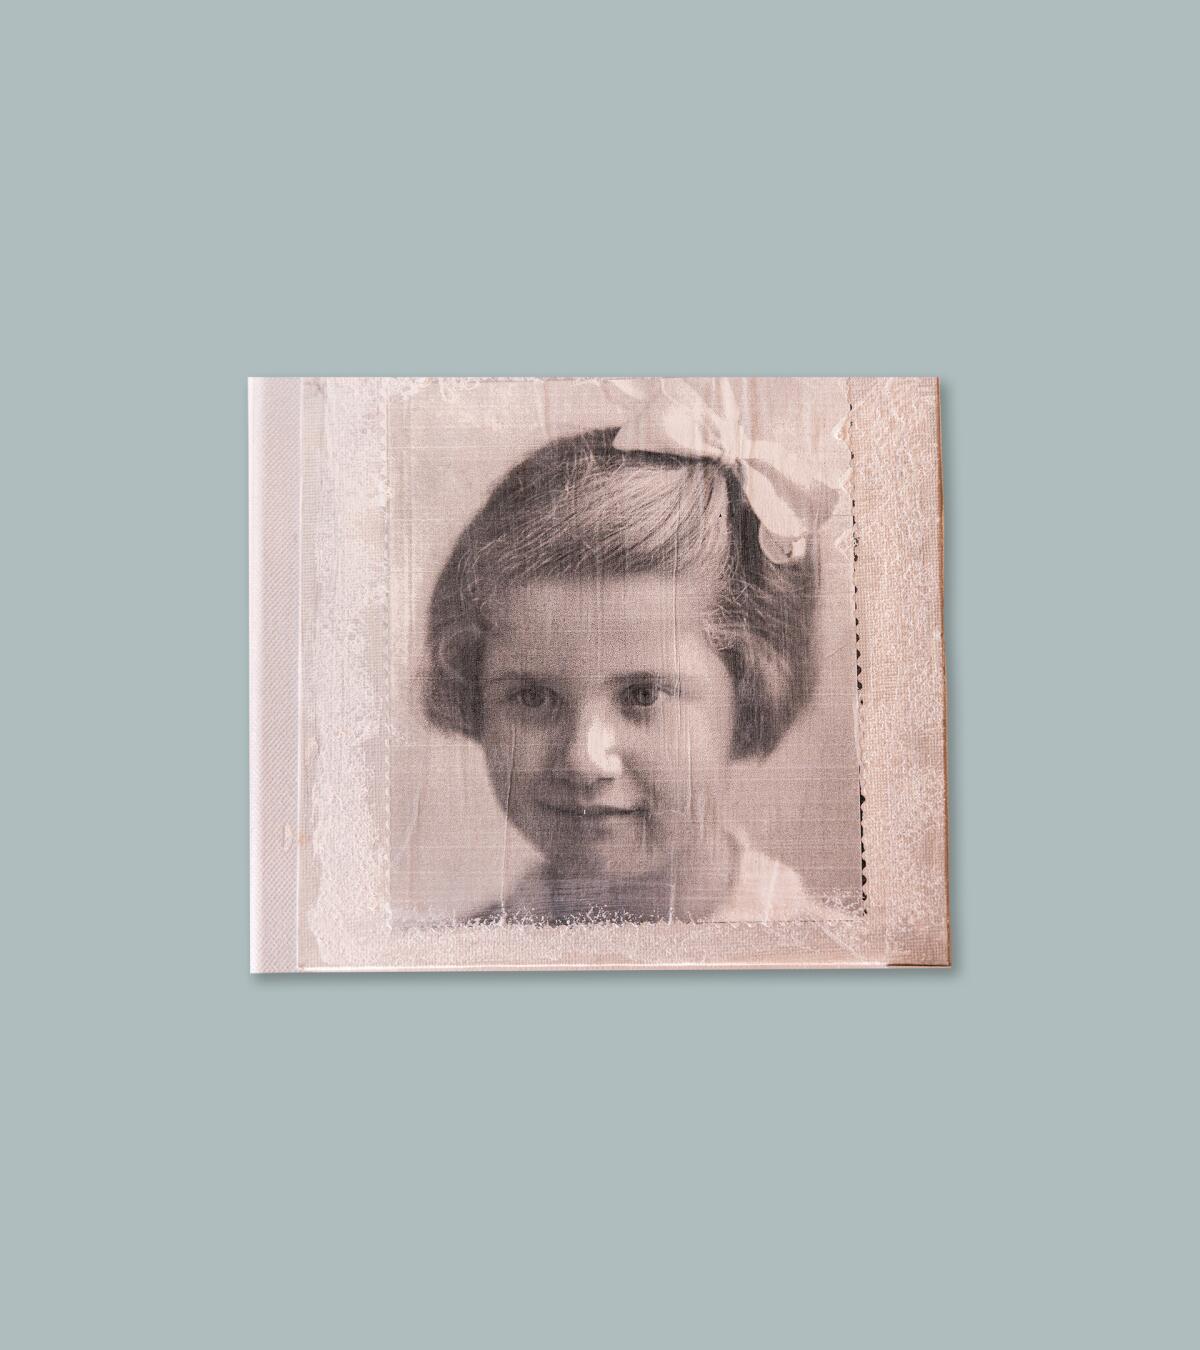 A scan of a photograph of a young Josie Levy Martin, who is wearing a bow in her hair.